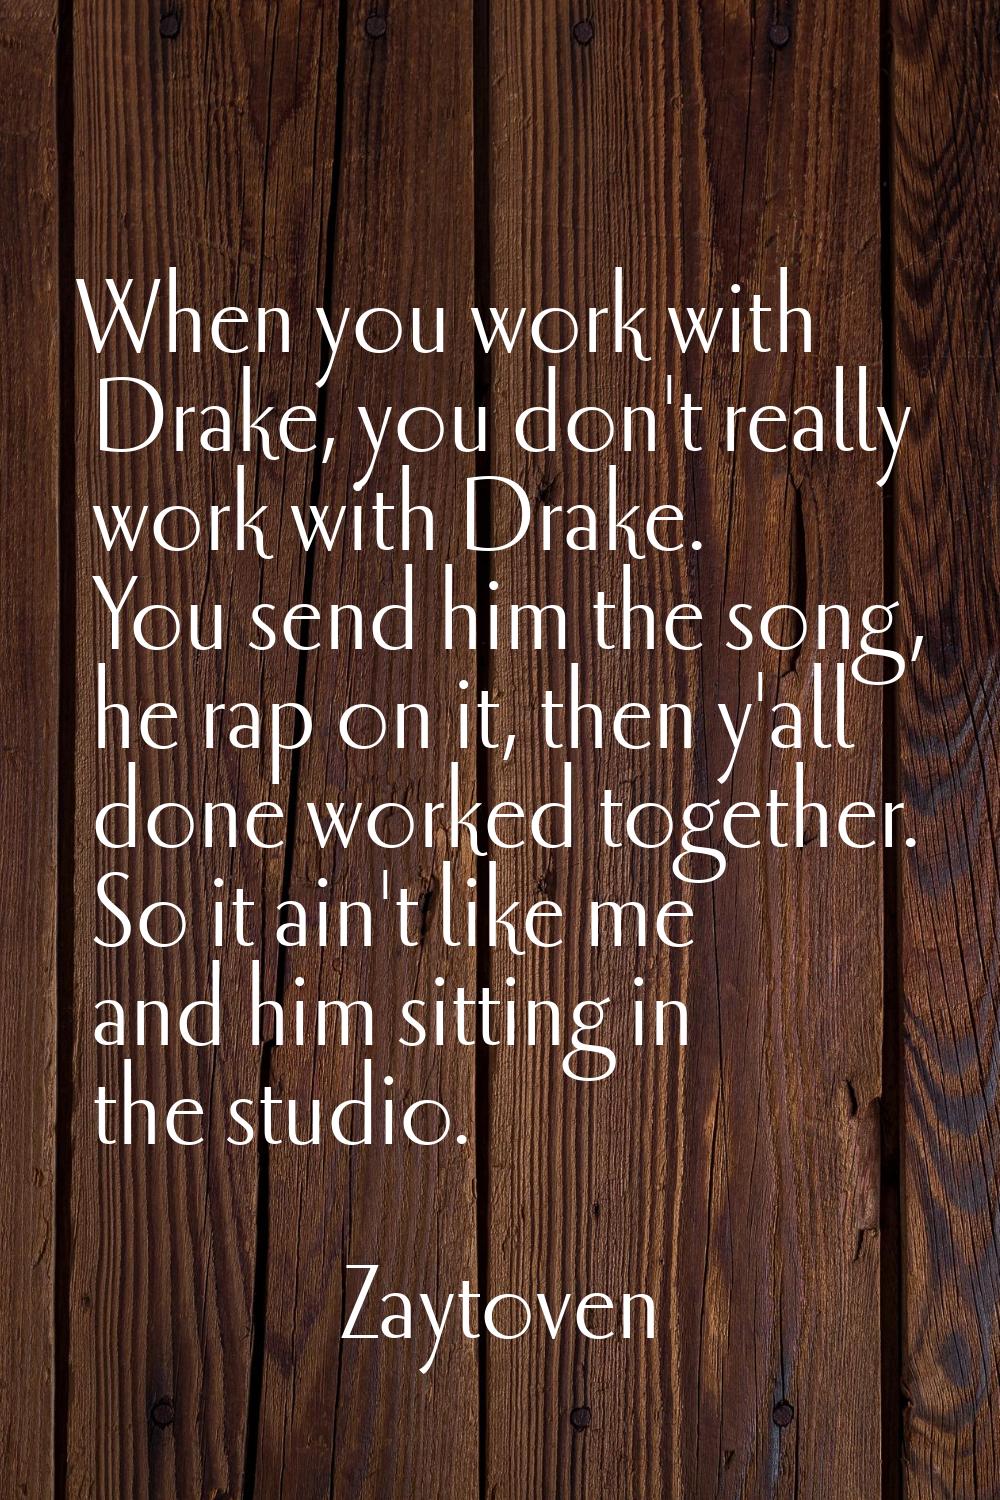 When you work with Drake, you don't really work with Drake. You send him the song, he rap on it, th